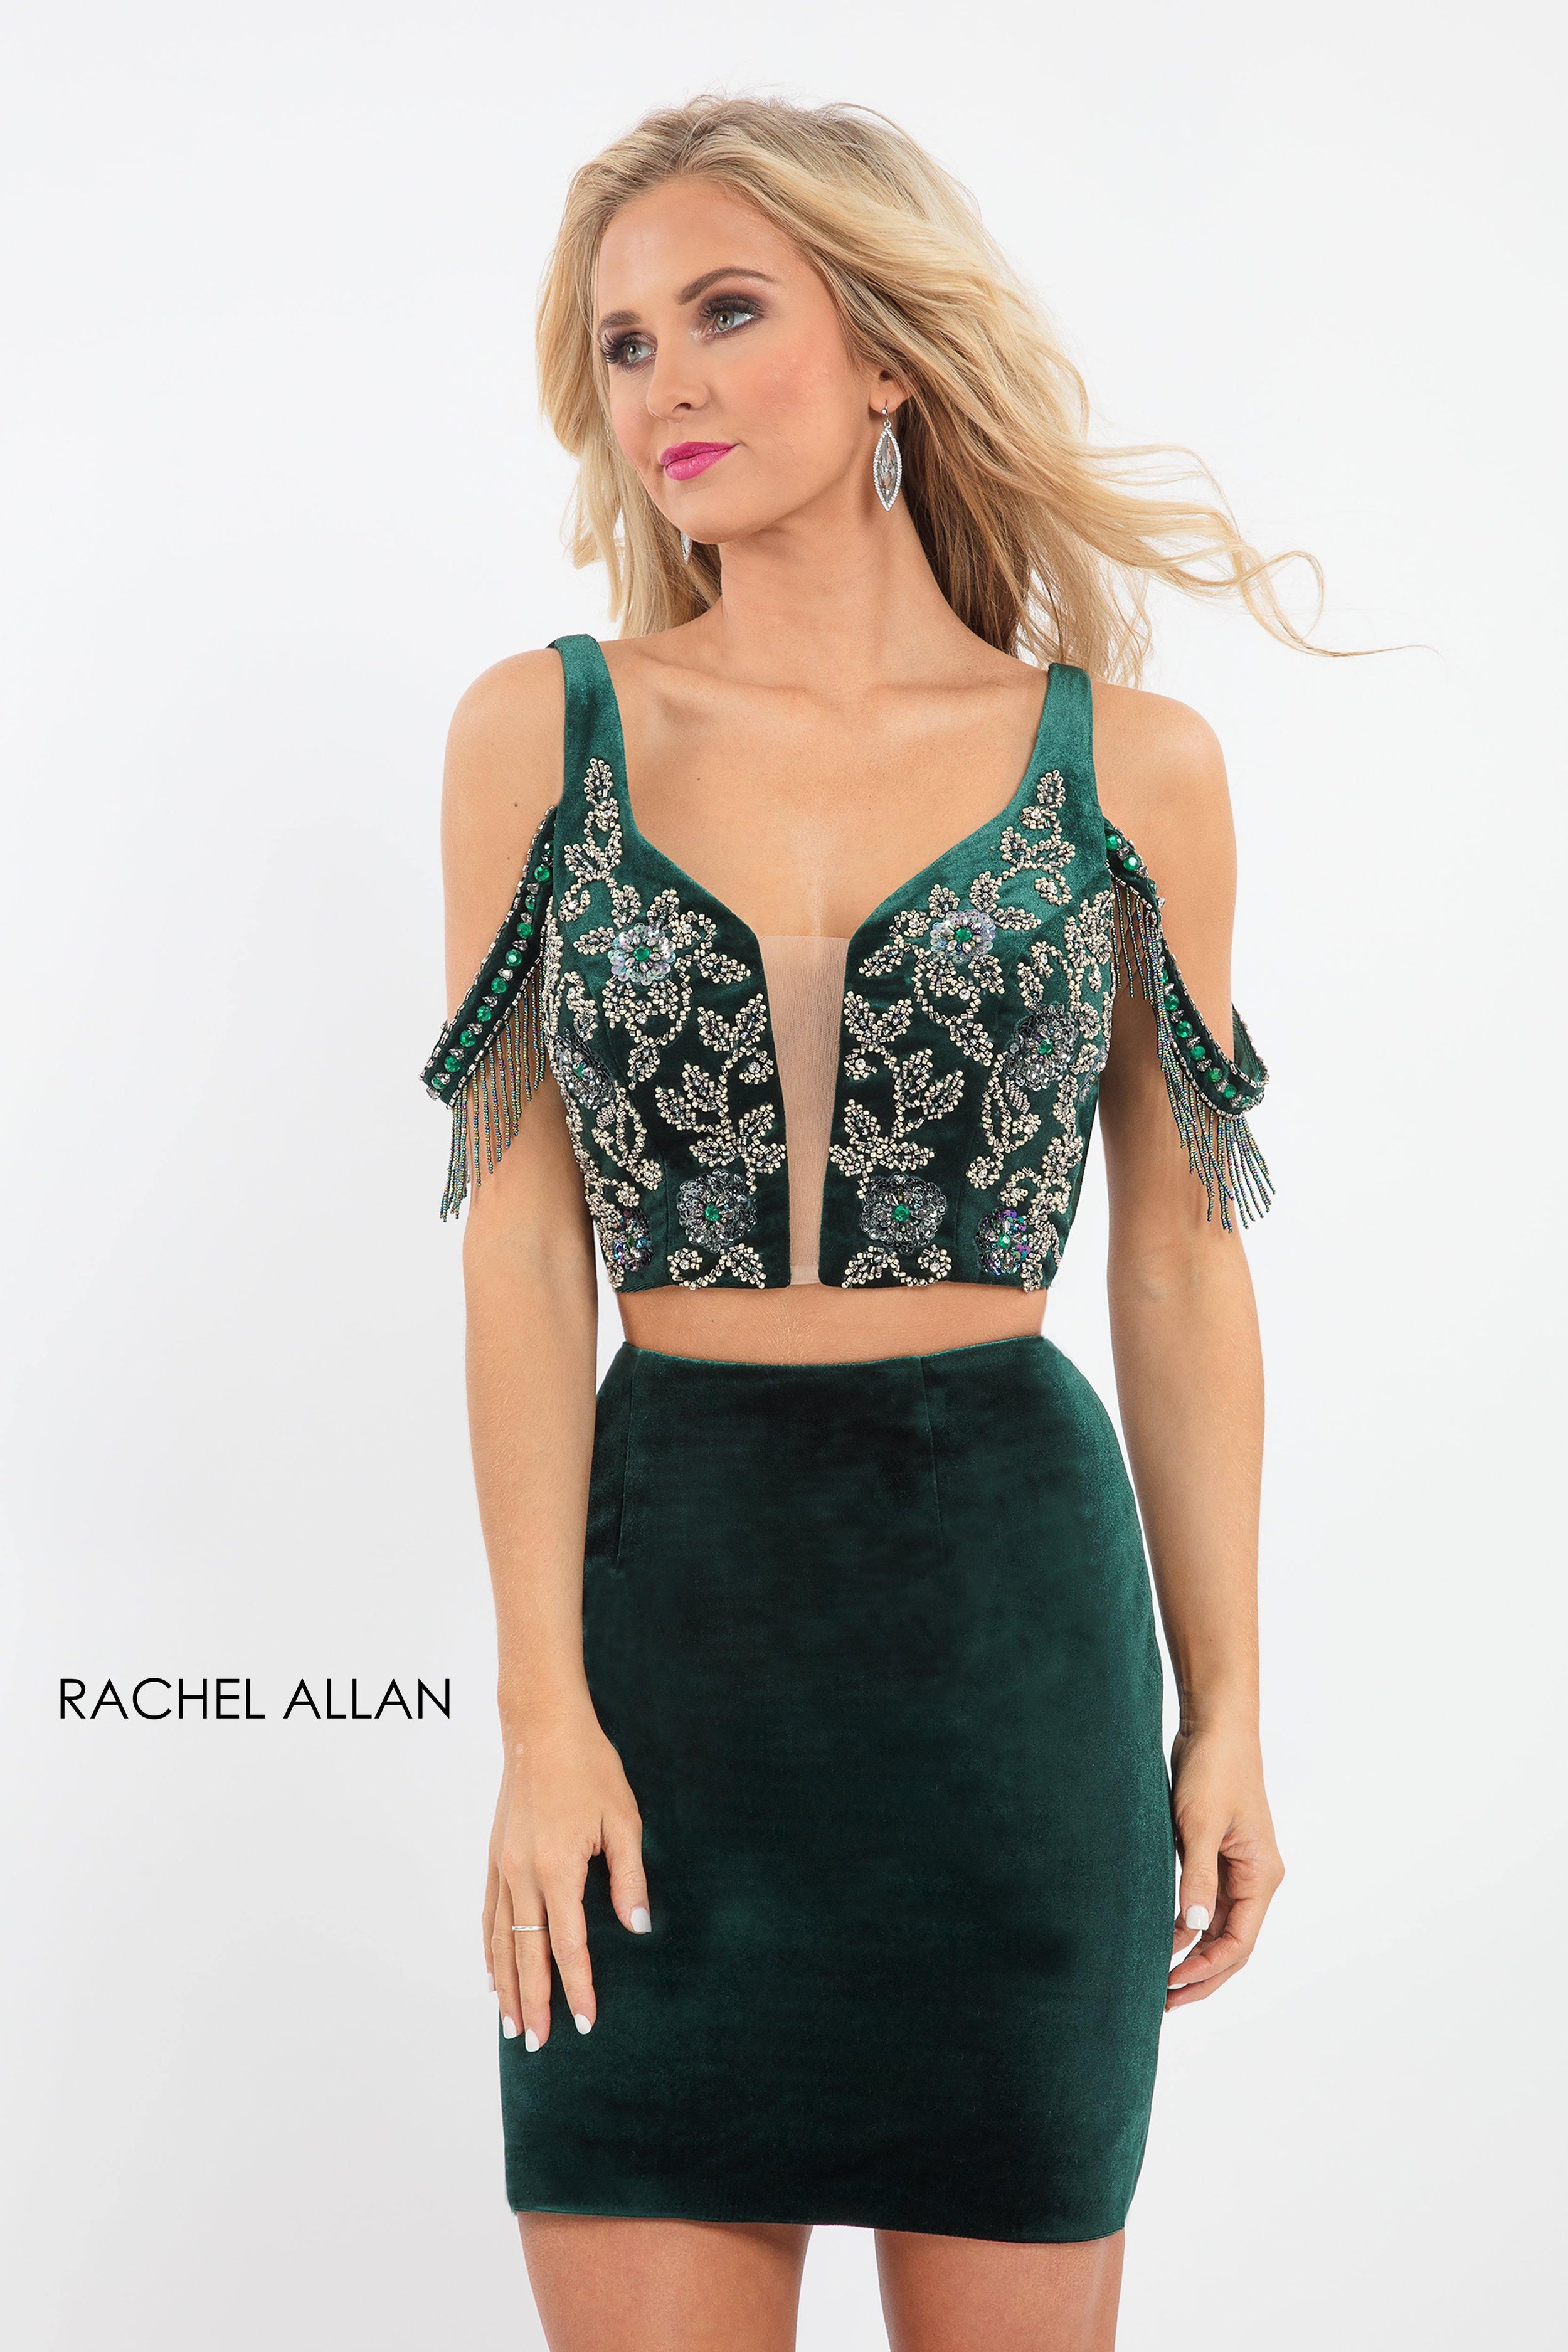 Rachel Allan Sexy Two Piece Homecoming Dress - The Dress Outlet